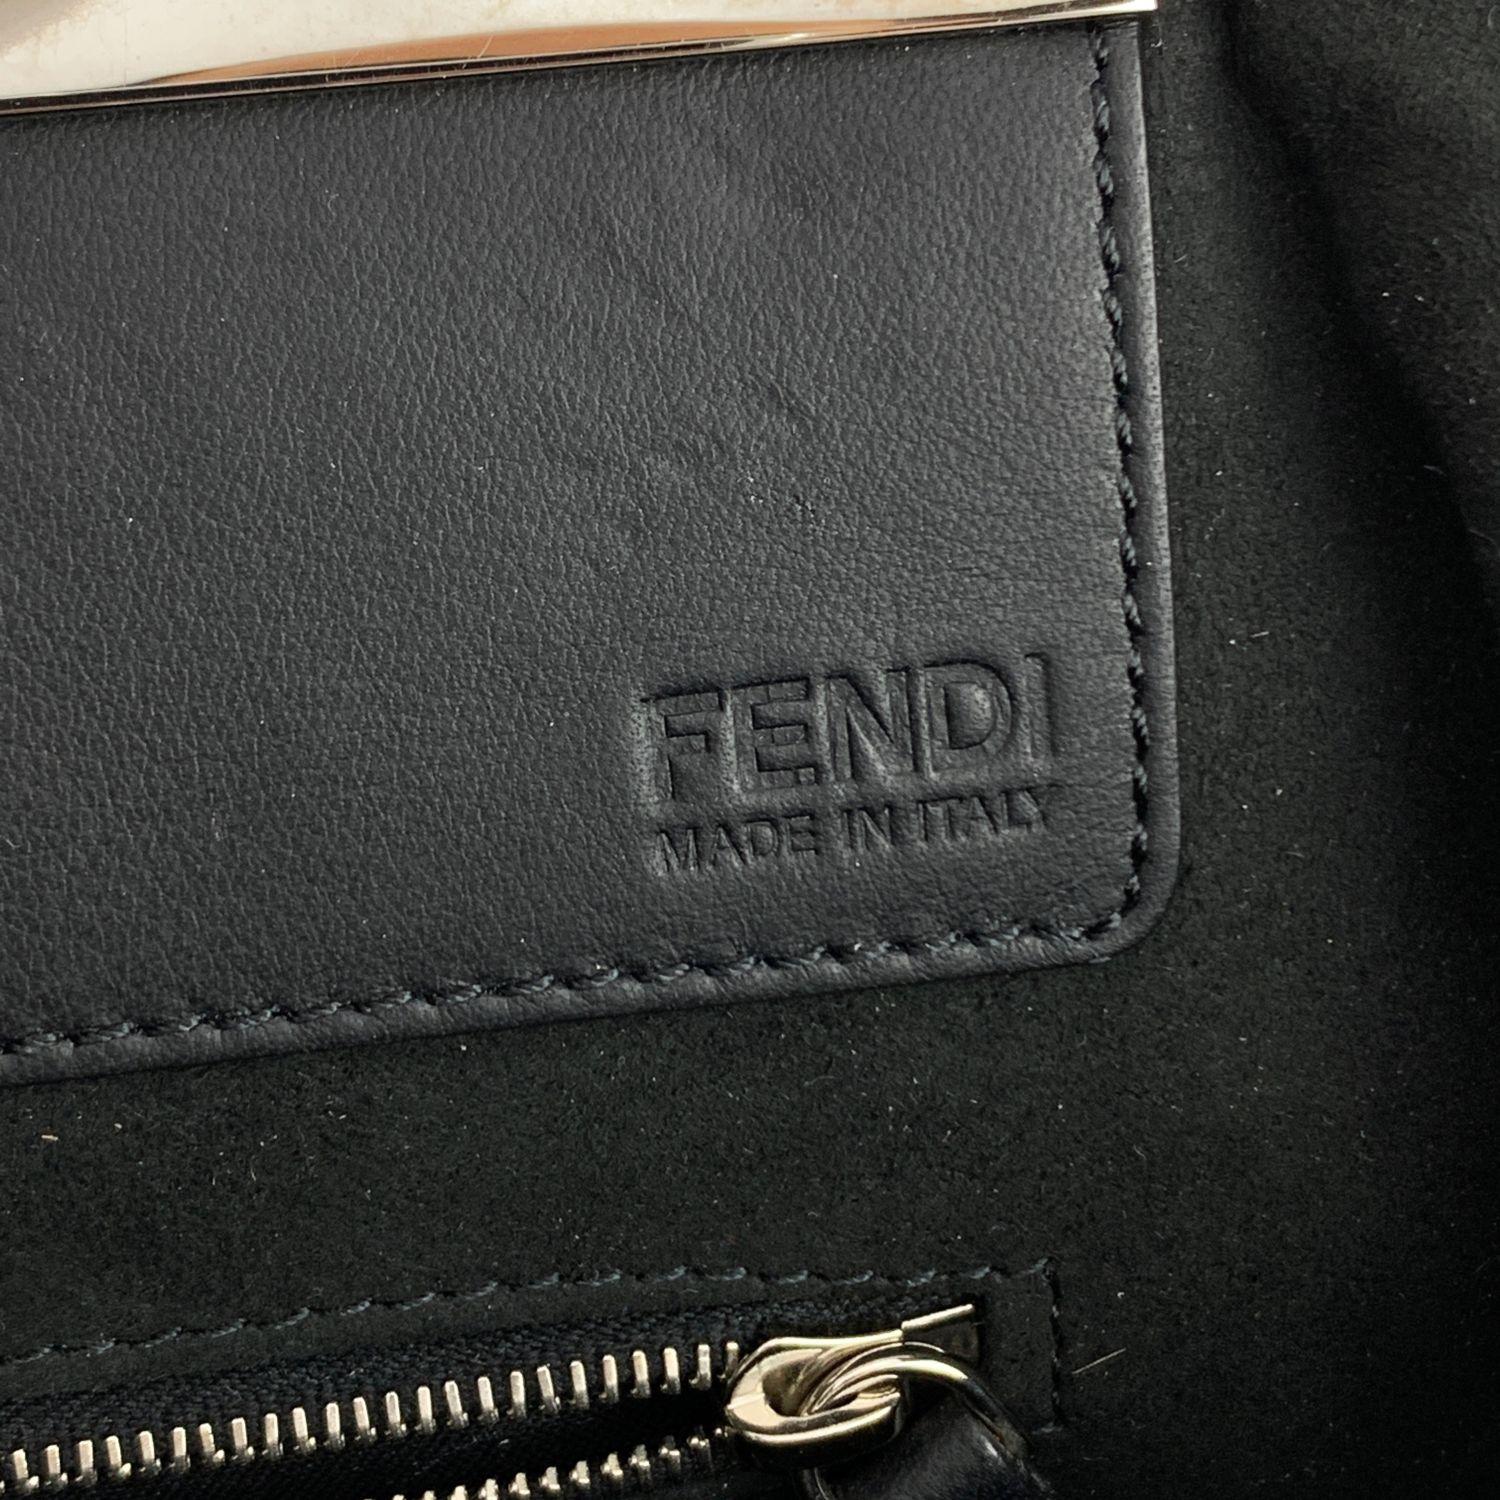 Fendi Bicolor Black and Silver Leather 3Jours Tote Shopping Bag 4